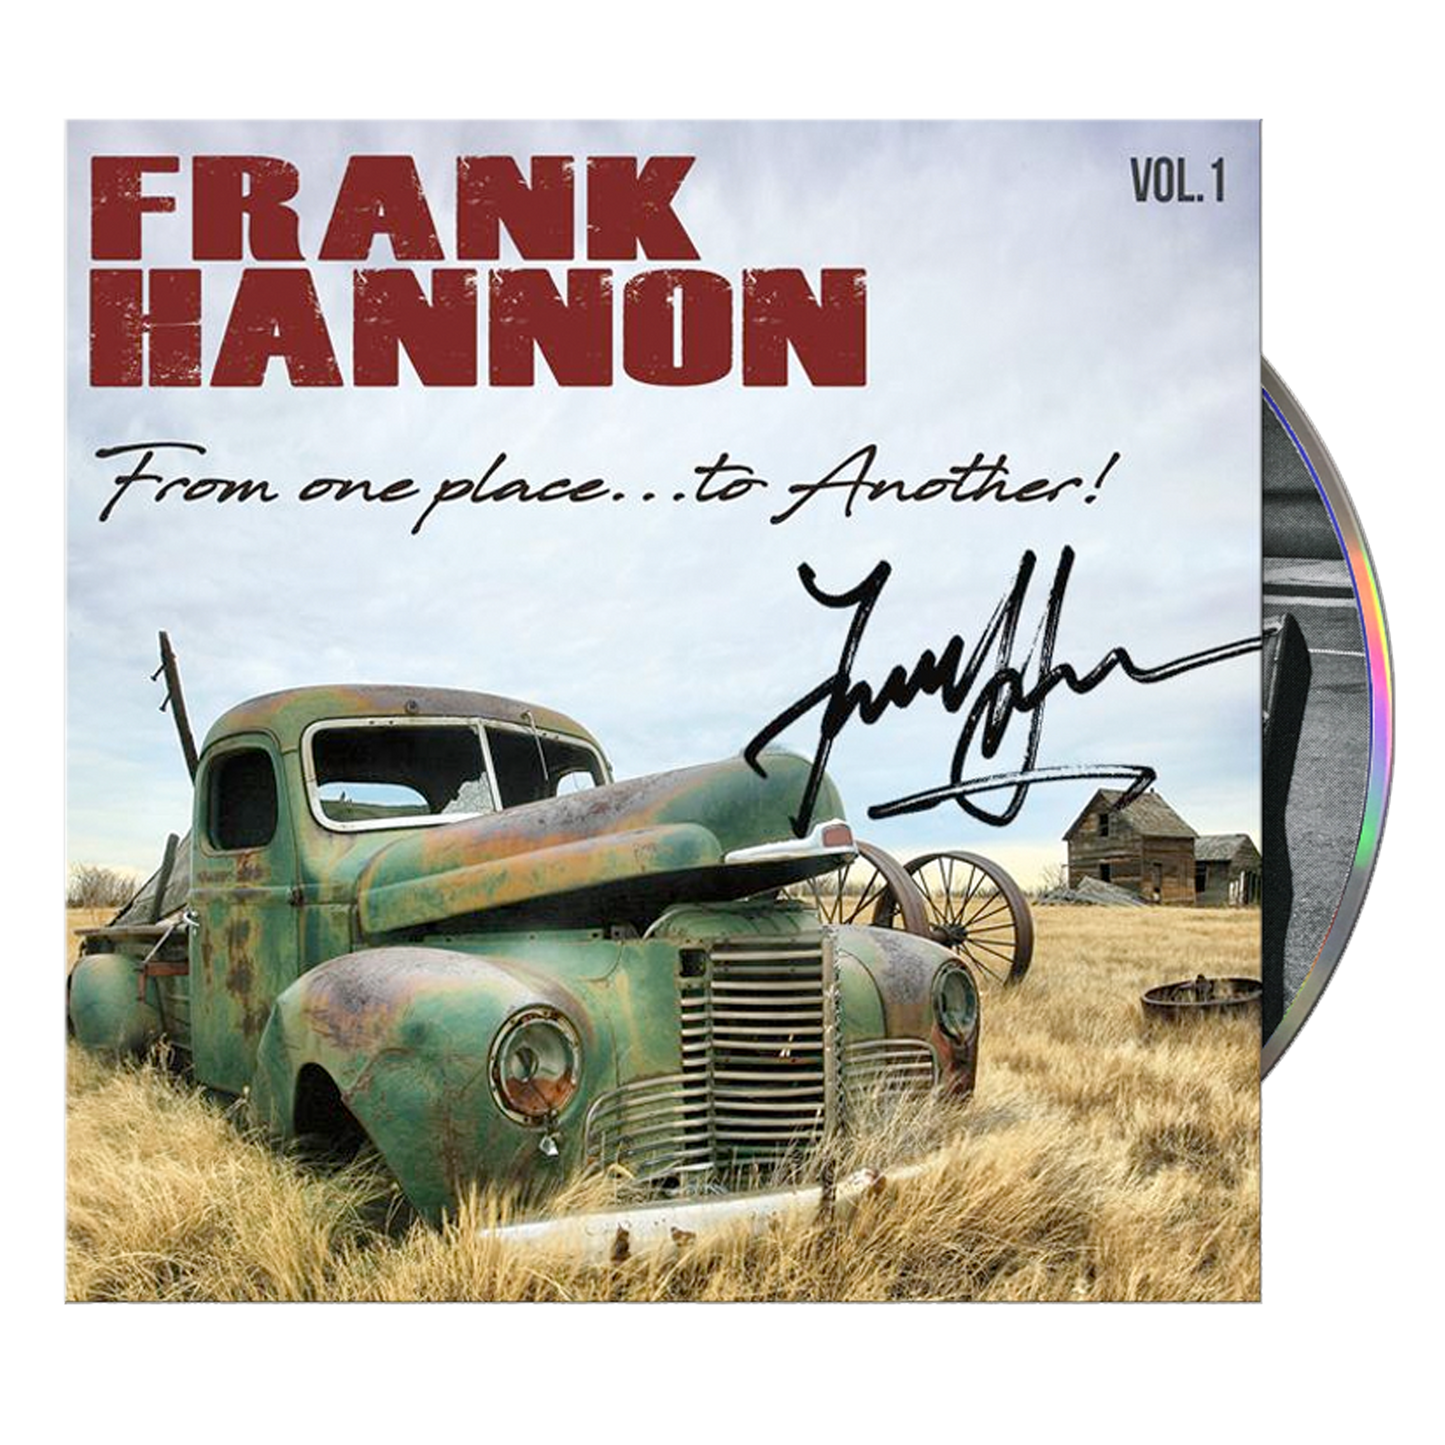 From one place...to Another, Vol. 1 (Autographed CD)